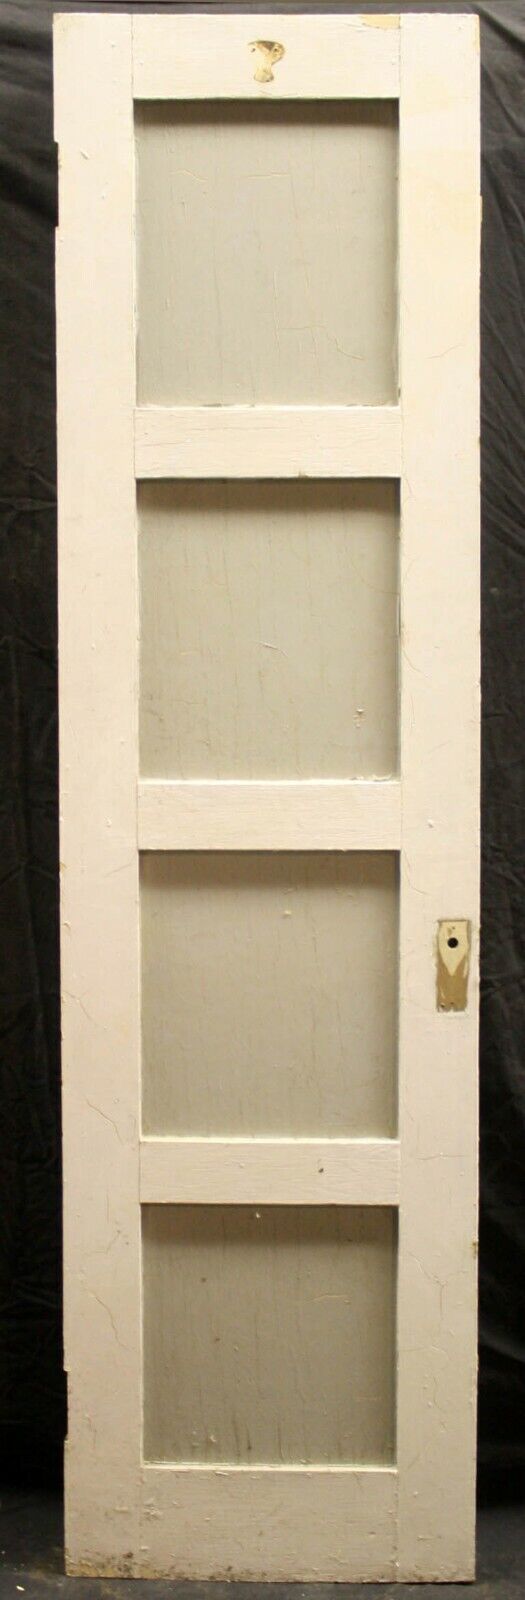 20"x78.5" Antique Vintage Old Reclaimed Salvaged SOLID Wood Wooden Interior Closet Pantry Door Panel